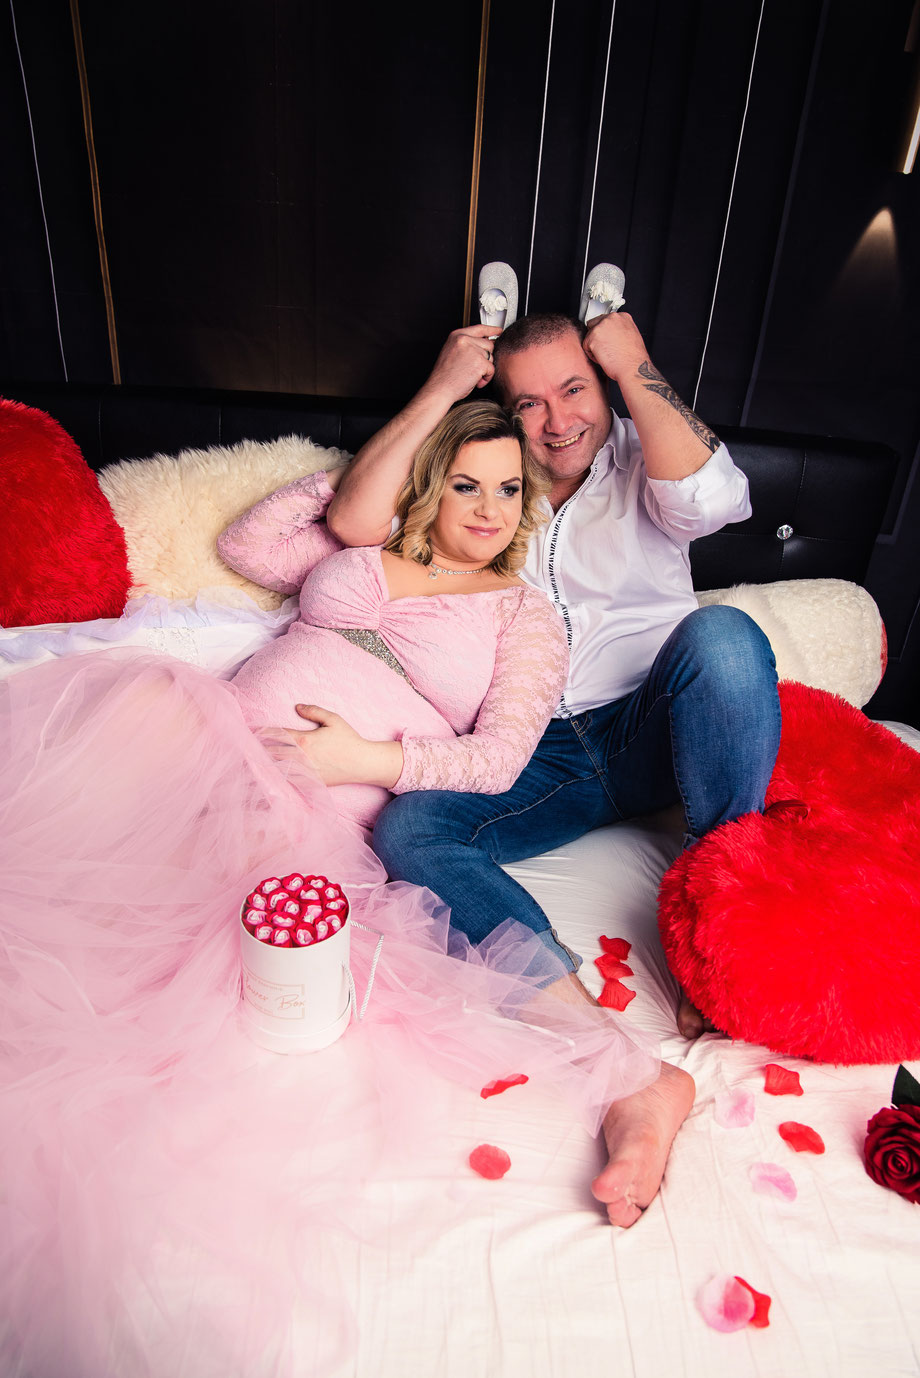 couple having fun on bed in maternity shoot